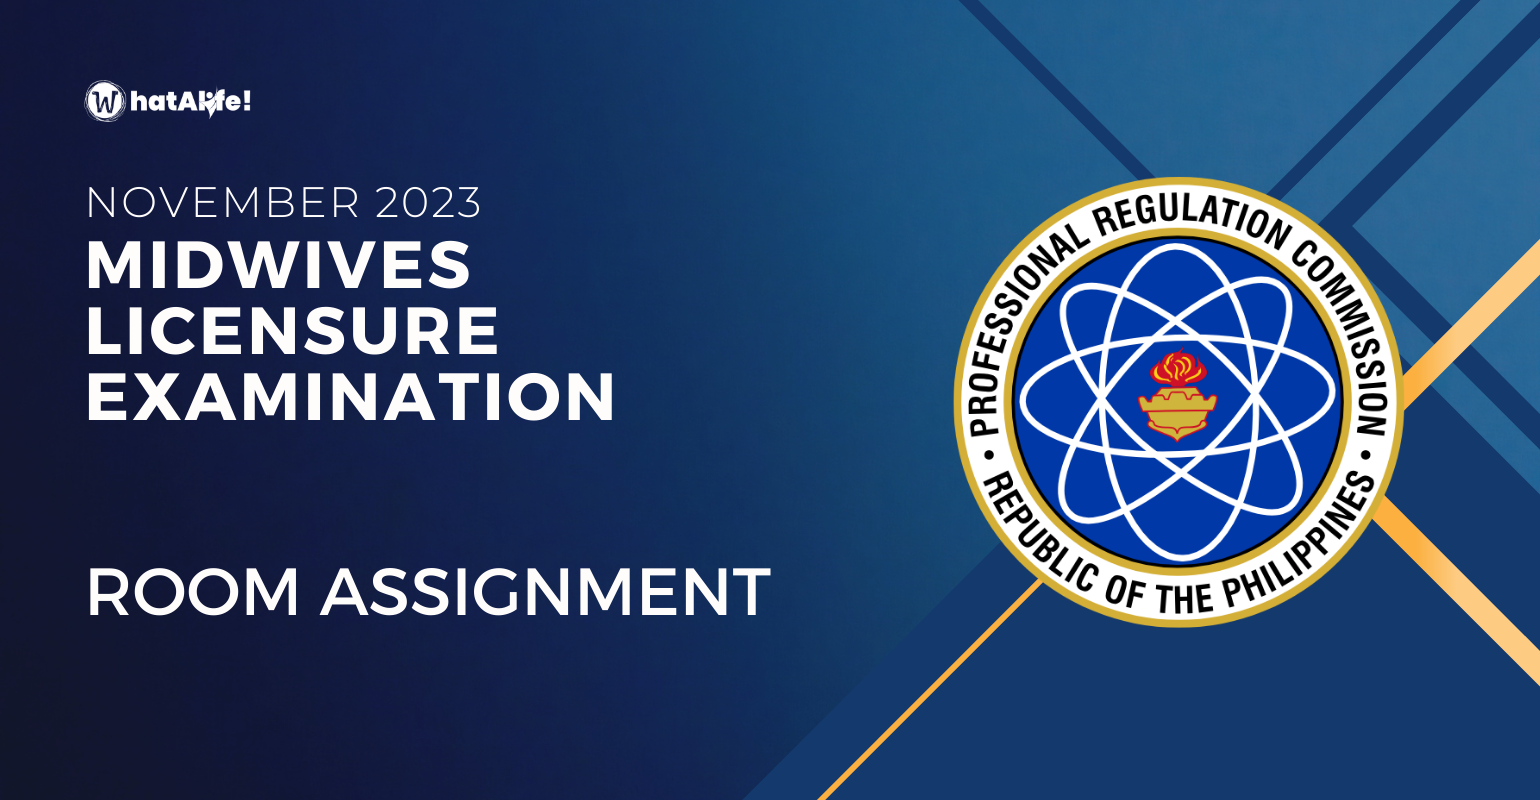 room assignment november 2023 midwives licensure exam